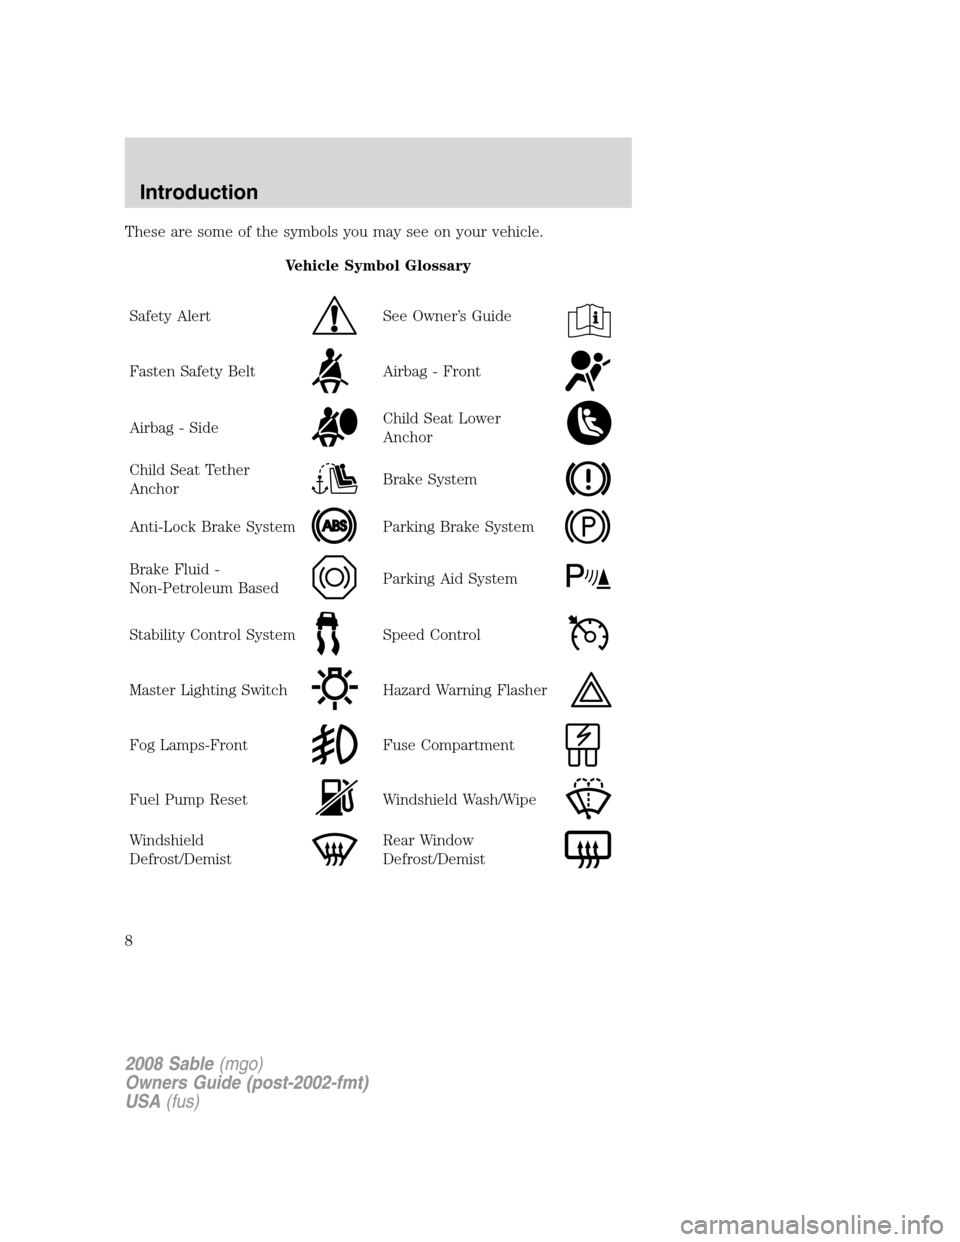 Mercury Sable 2008  Owners Manuals These are some of the symbols you may see on your vehicle.
Vehicle Symbol Glossary
Safety Alert
See Owner’s Guide
Fasten Safety BeltAirbag - Front
Airbag - SideChild Seat Lower
Anchor
Child Seat Tet